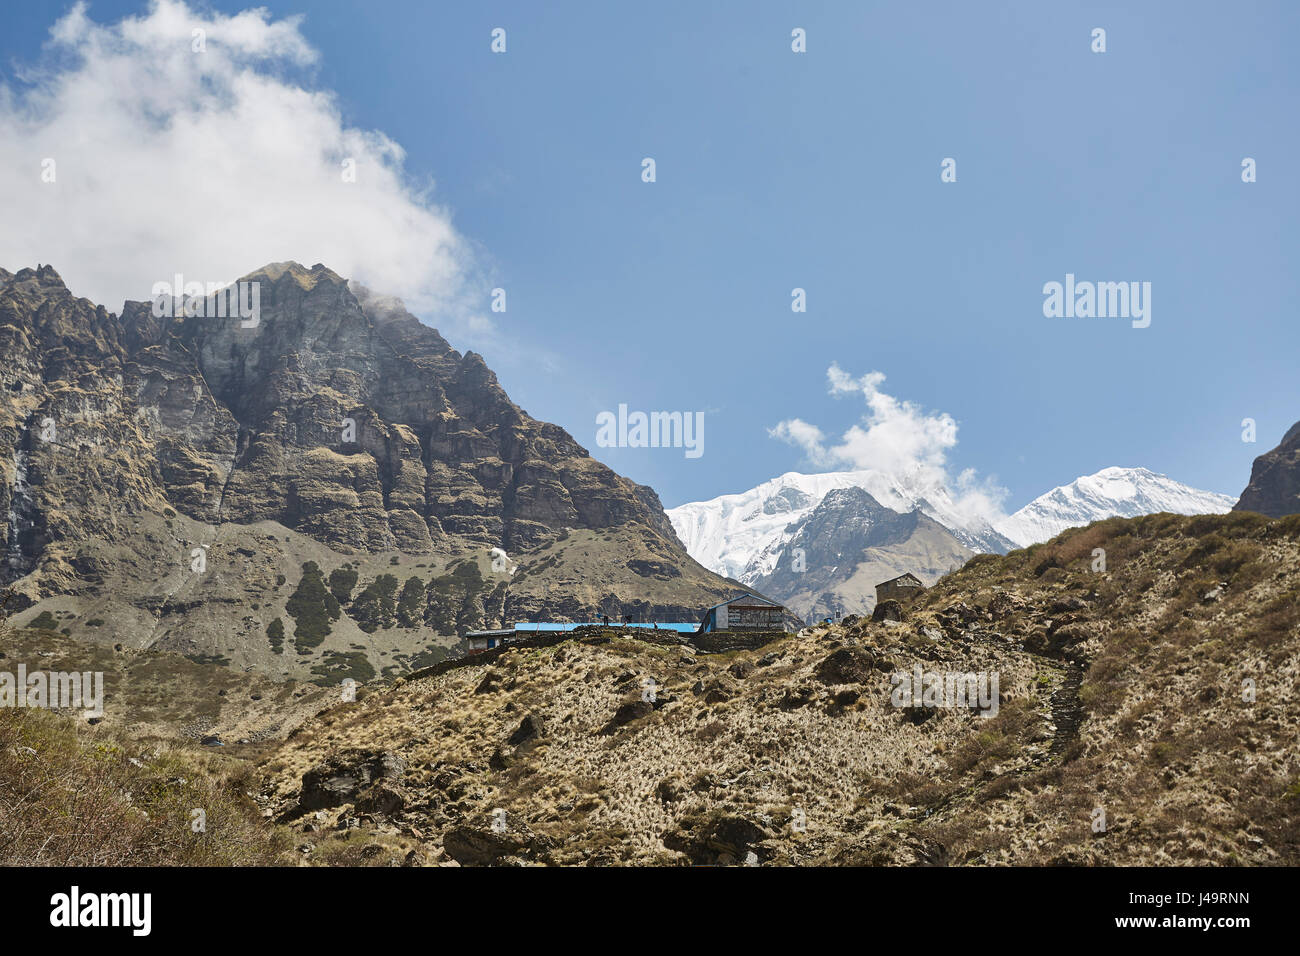 Remote accommodation in the valleys of the himalayan mountain range, Nepal. Stock Photo